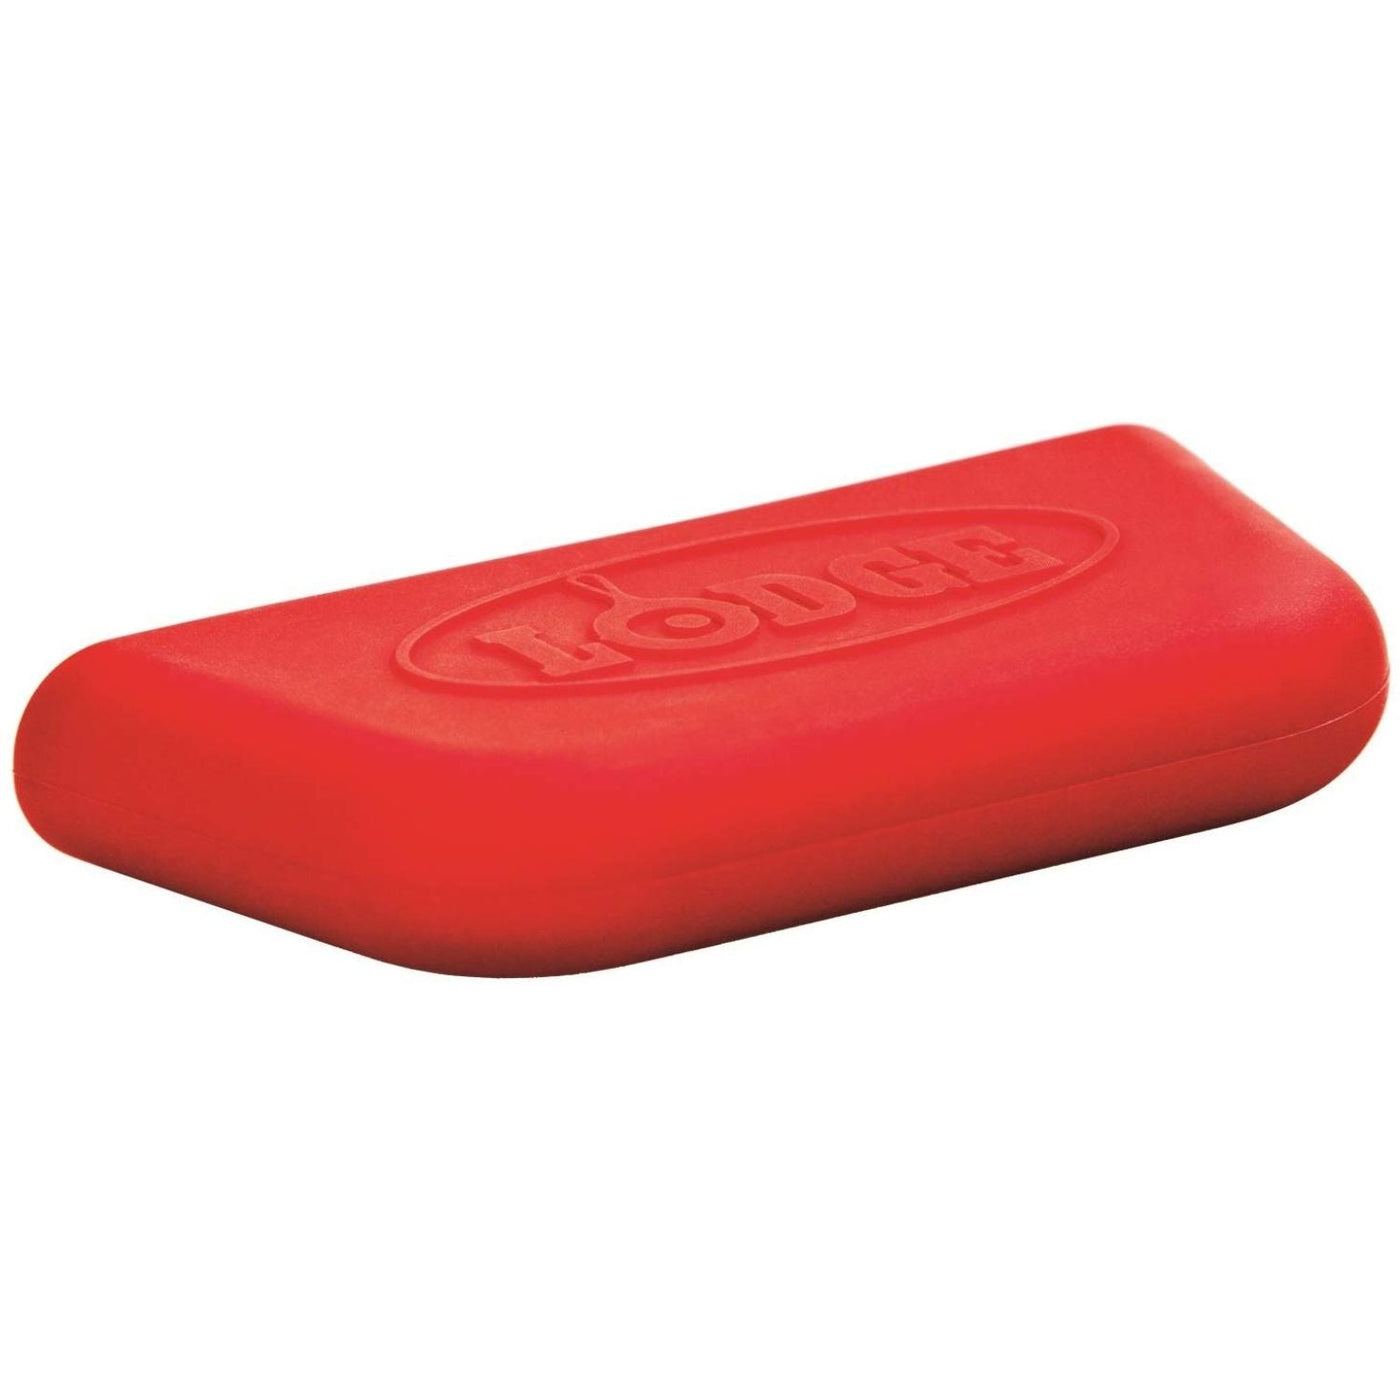 Lodge Cast Iron Lodge ASPHH41 Red Silicone Assist Handle Holder Camping And Outdoor